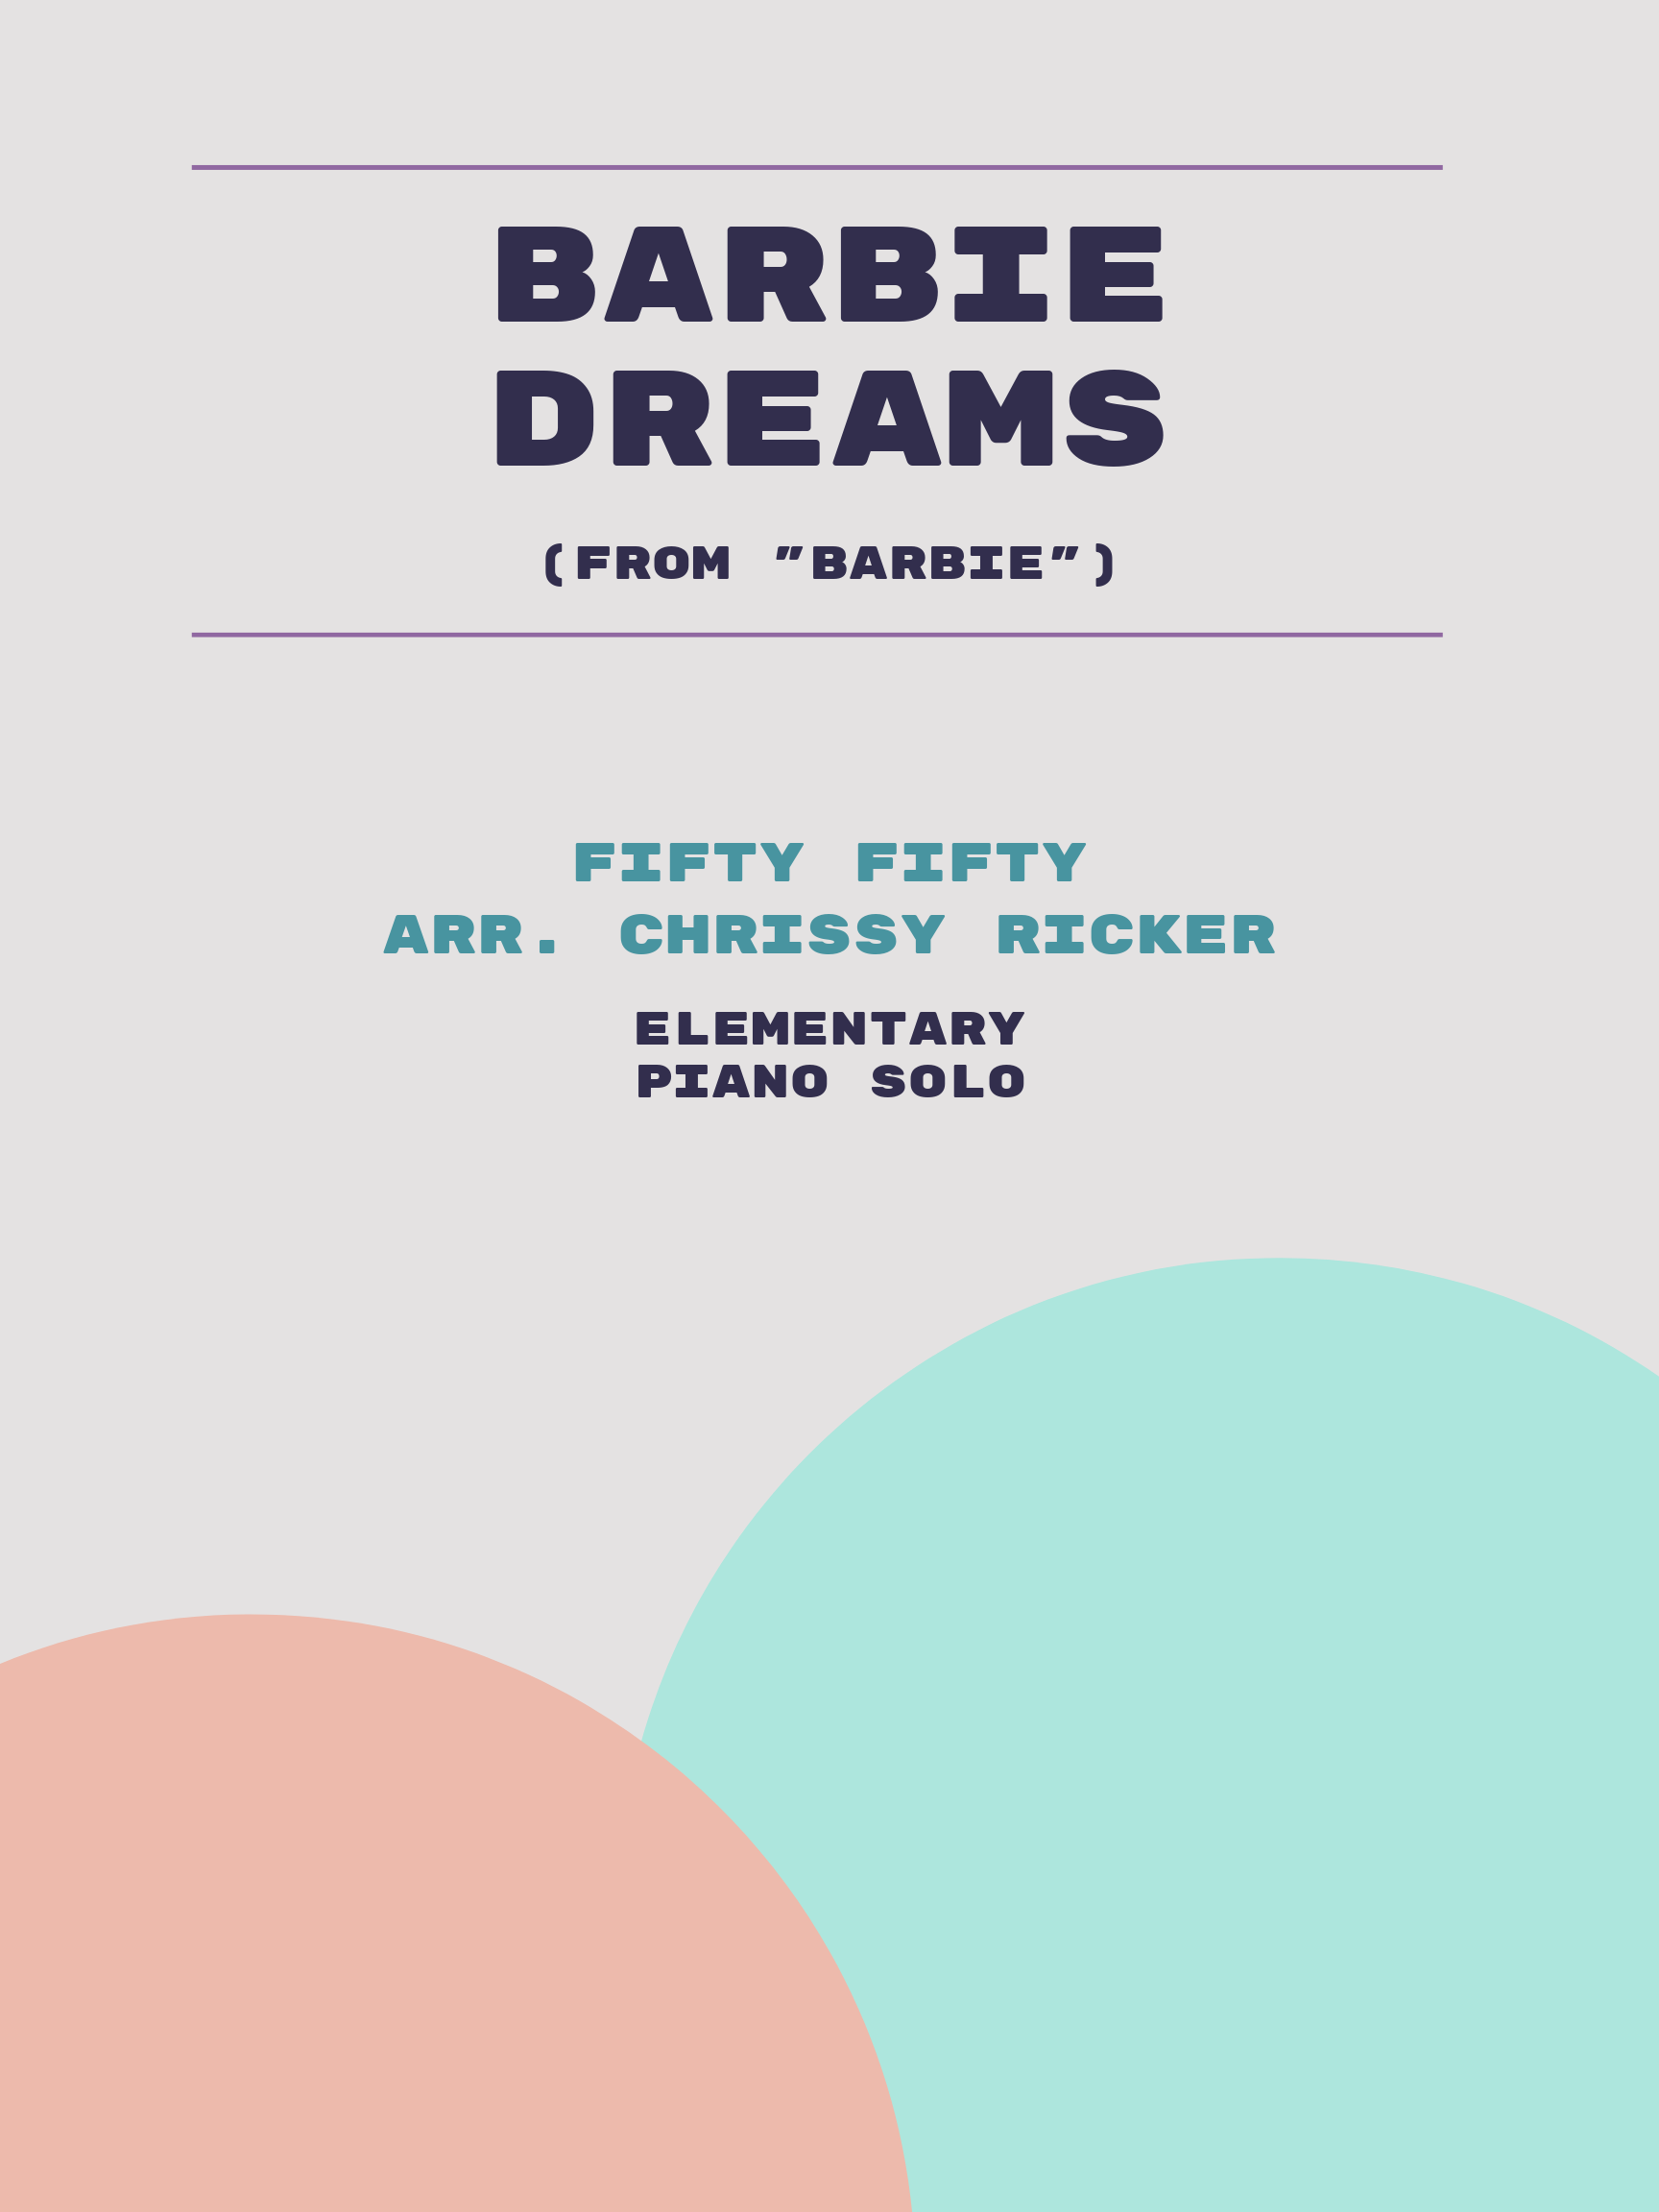 Barbie Dreams by FIFTY FIFTY